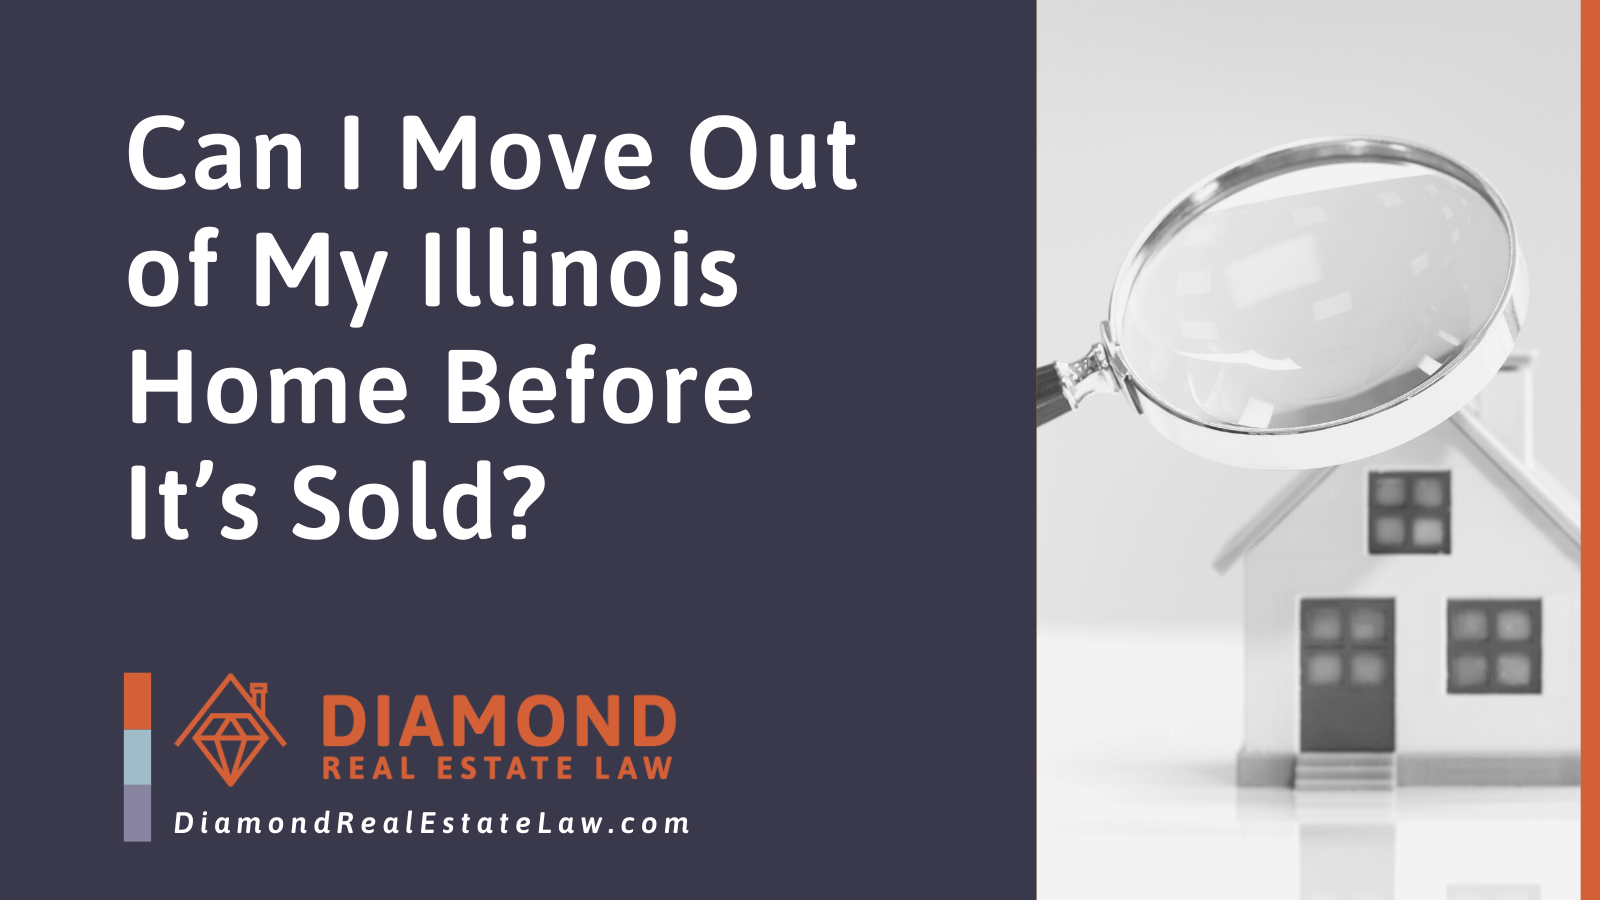 Can I Move Out of My Illinois Home Before It’s Sold - Diamond Real Estate Law | McHenry, IL Residential Real Estate Lawyer